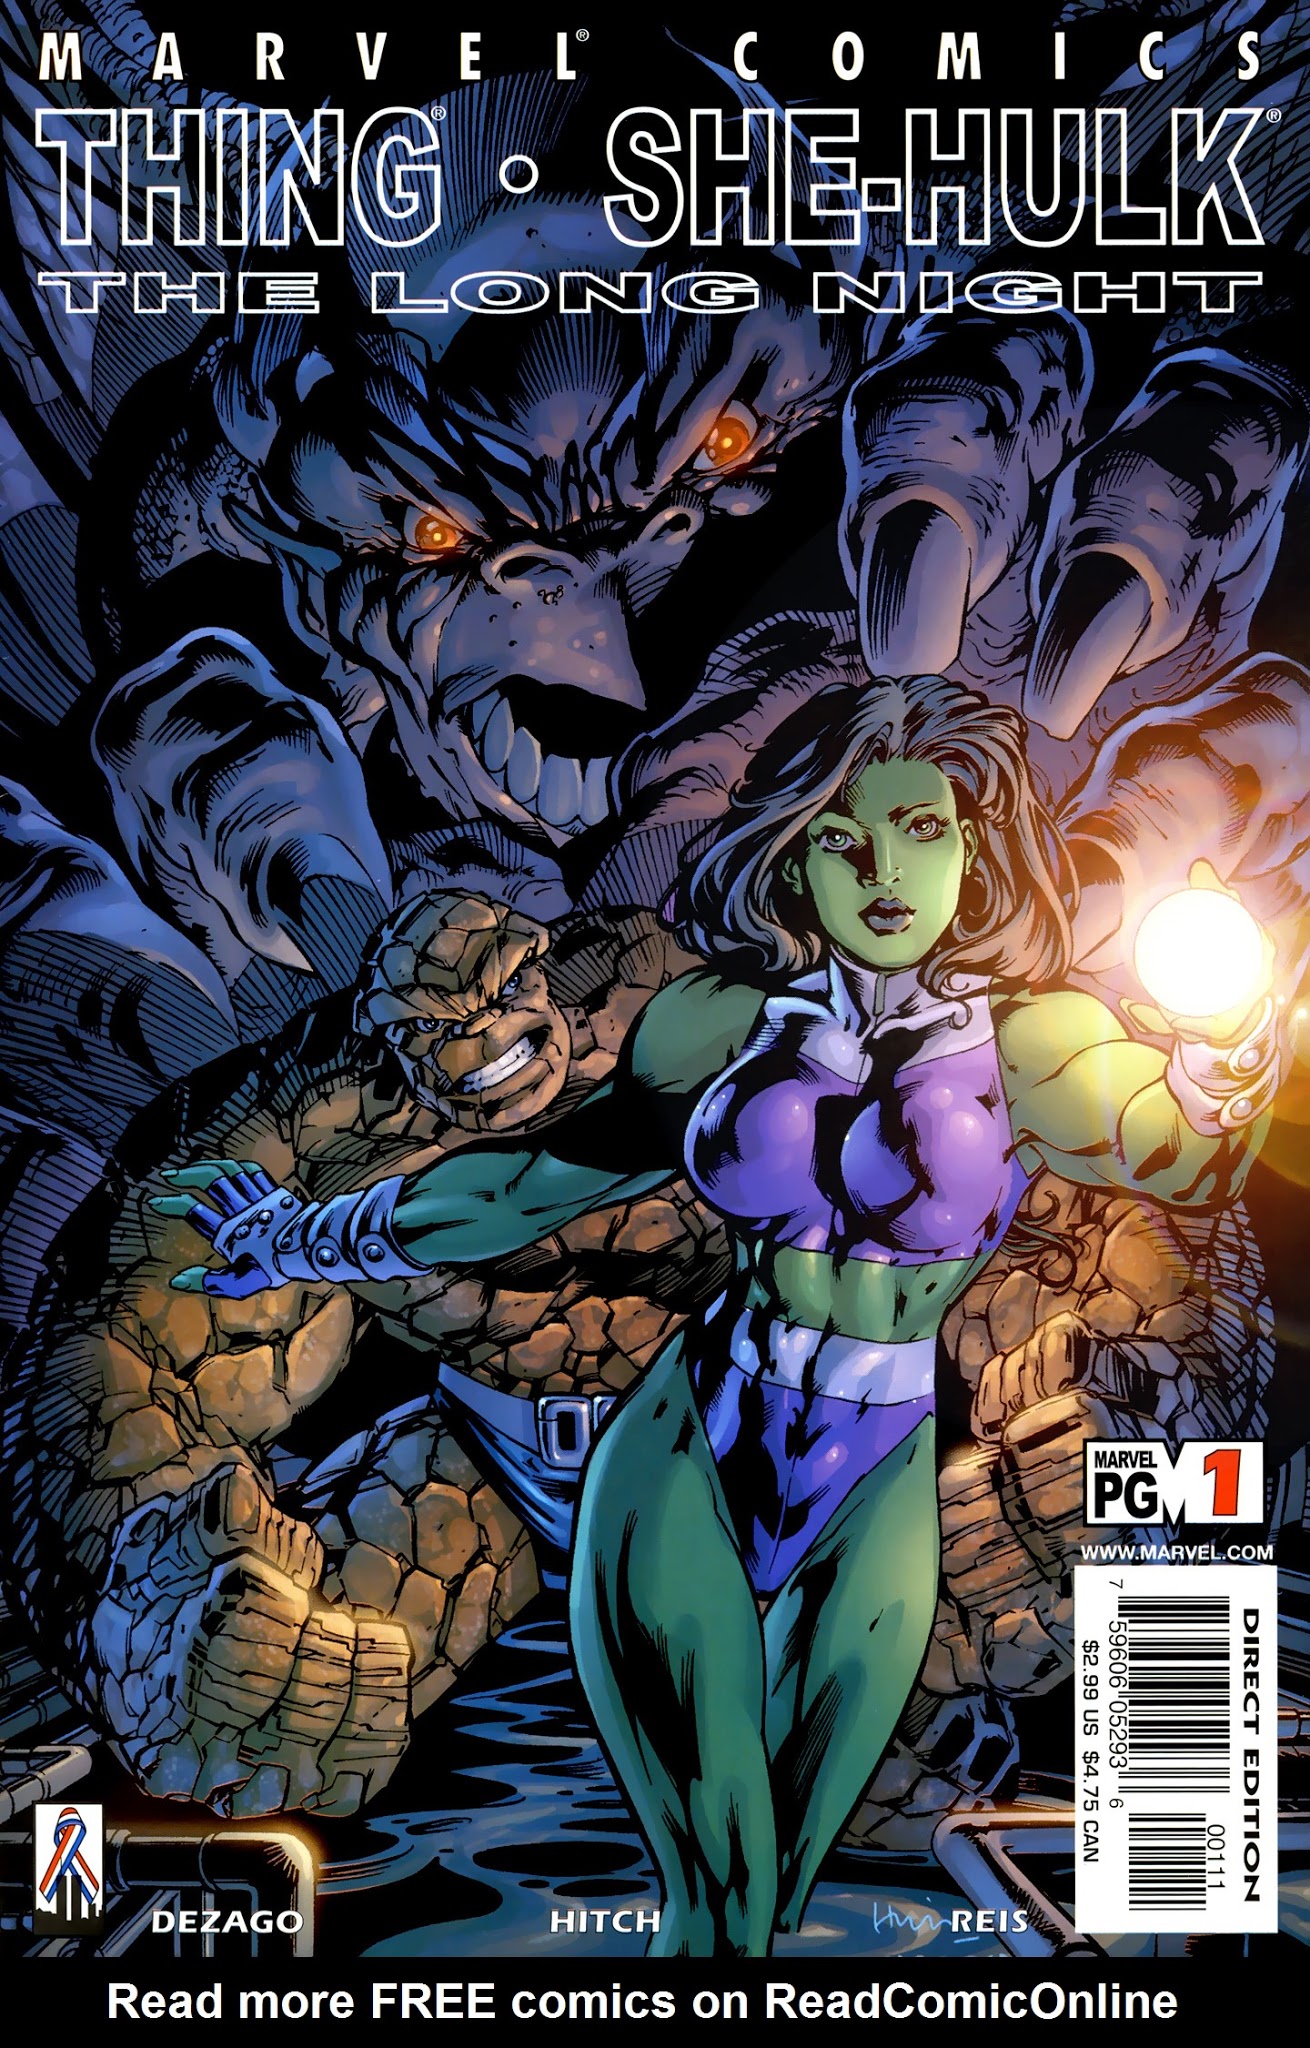 Read online Thing & She-Hulk: The Long Night comic -  Issue # Full - 1